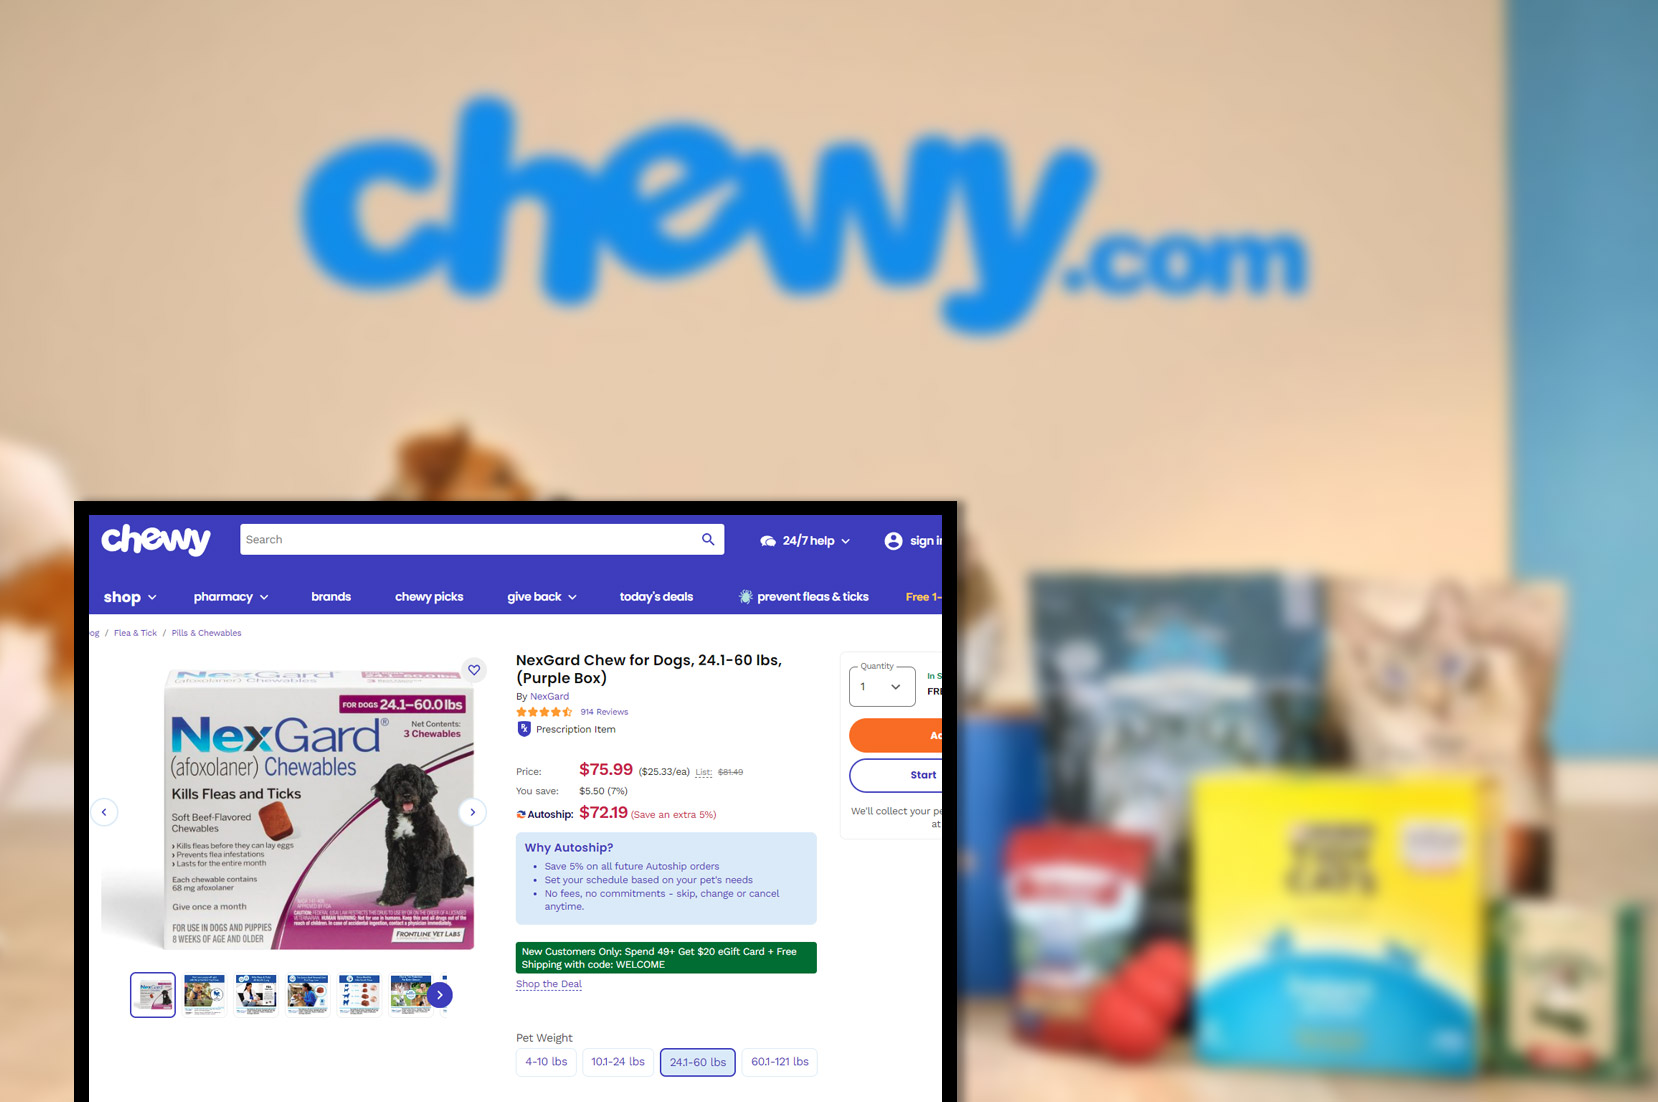 chewy-comproduct-pricing-information-and-image-scraping-services